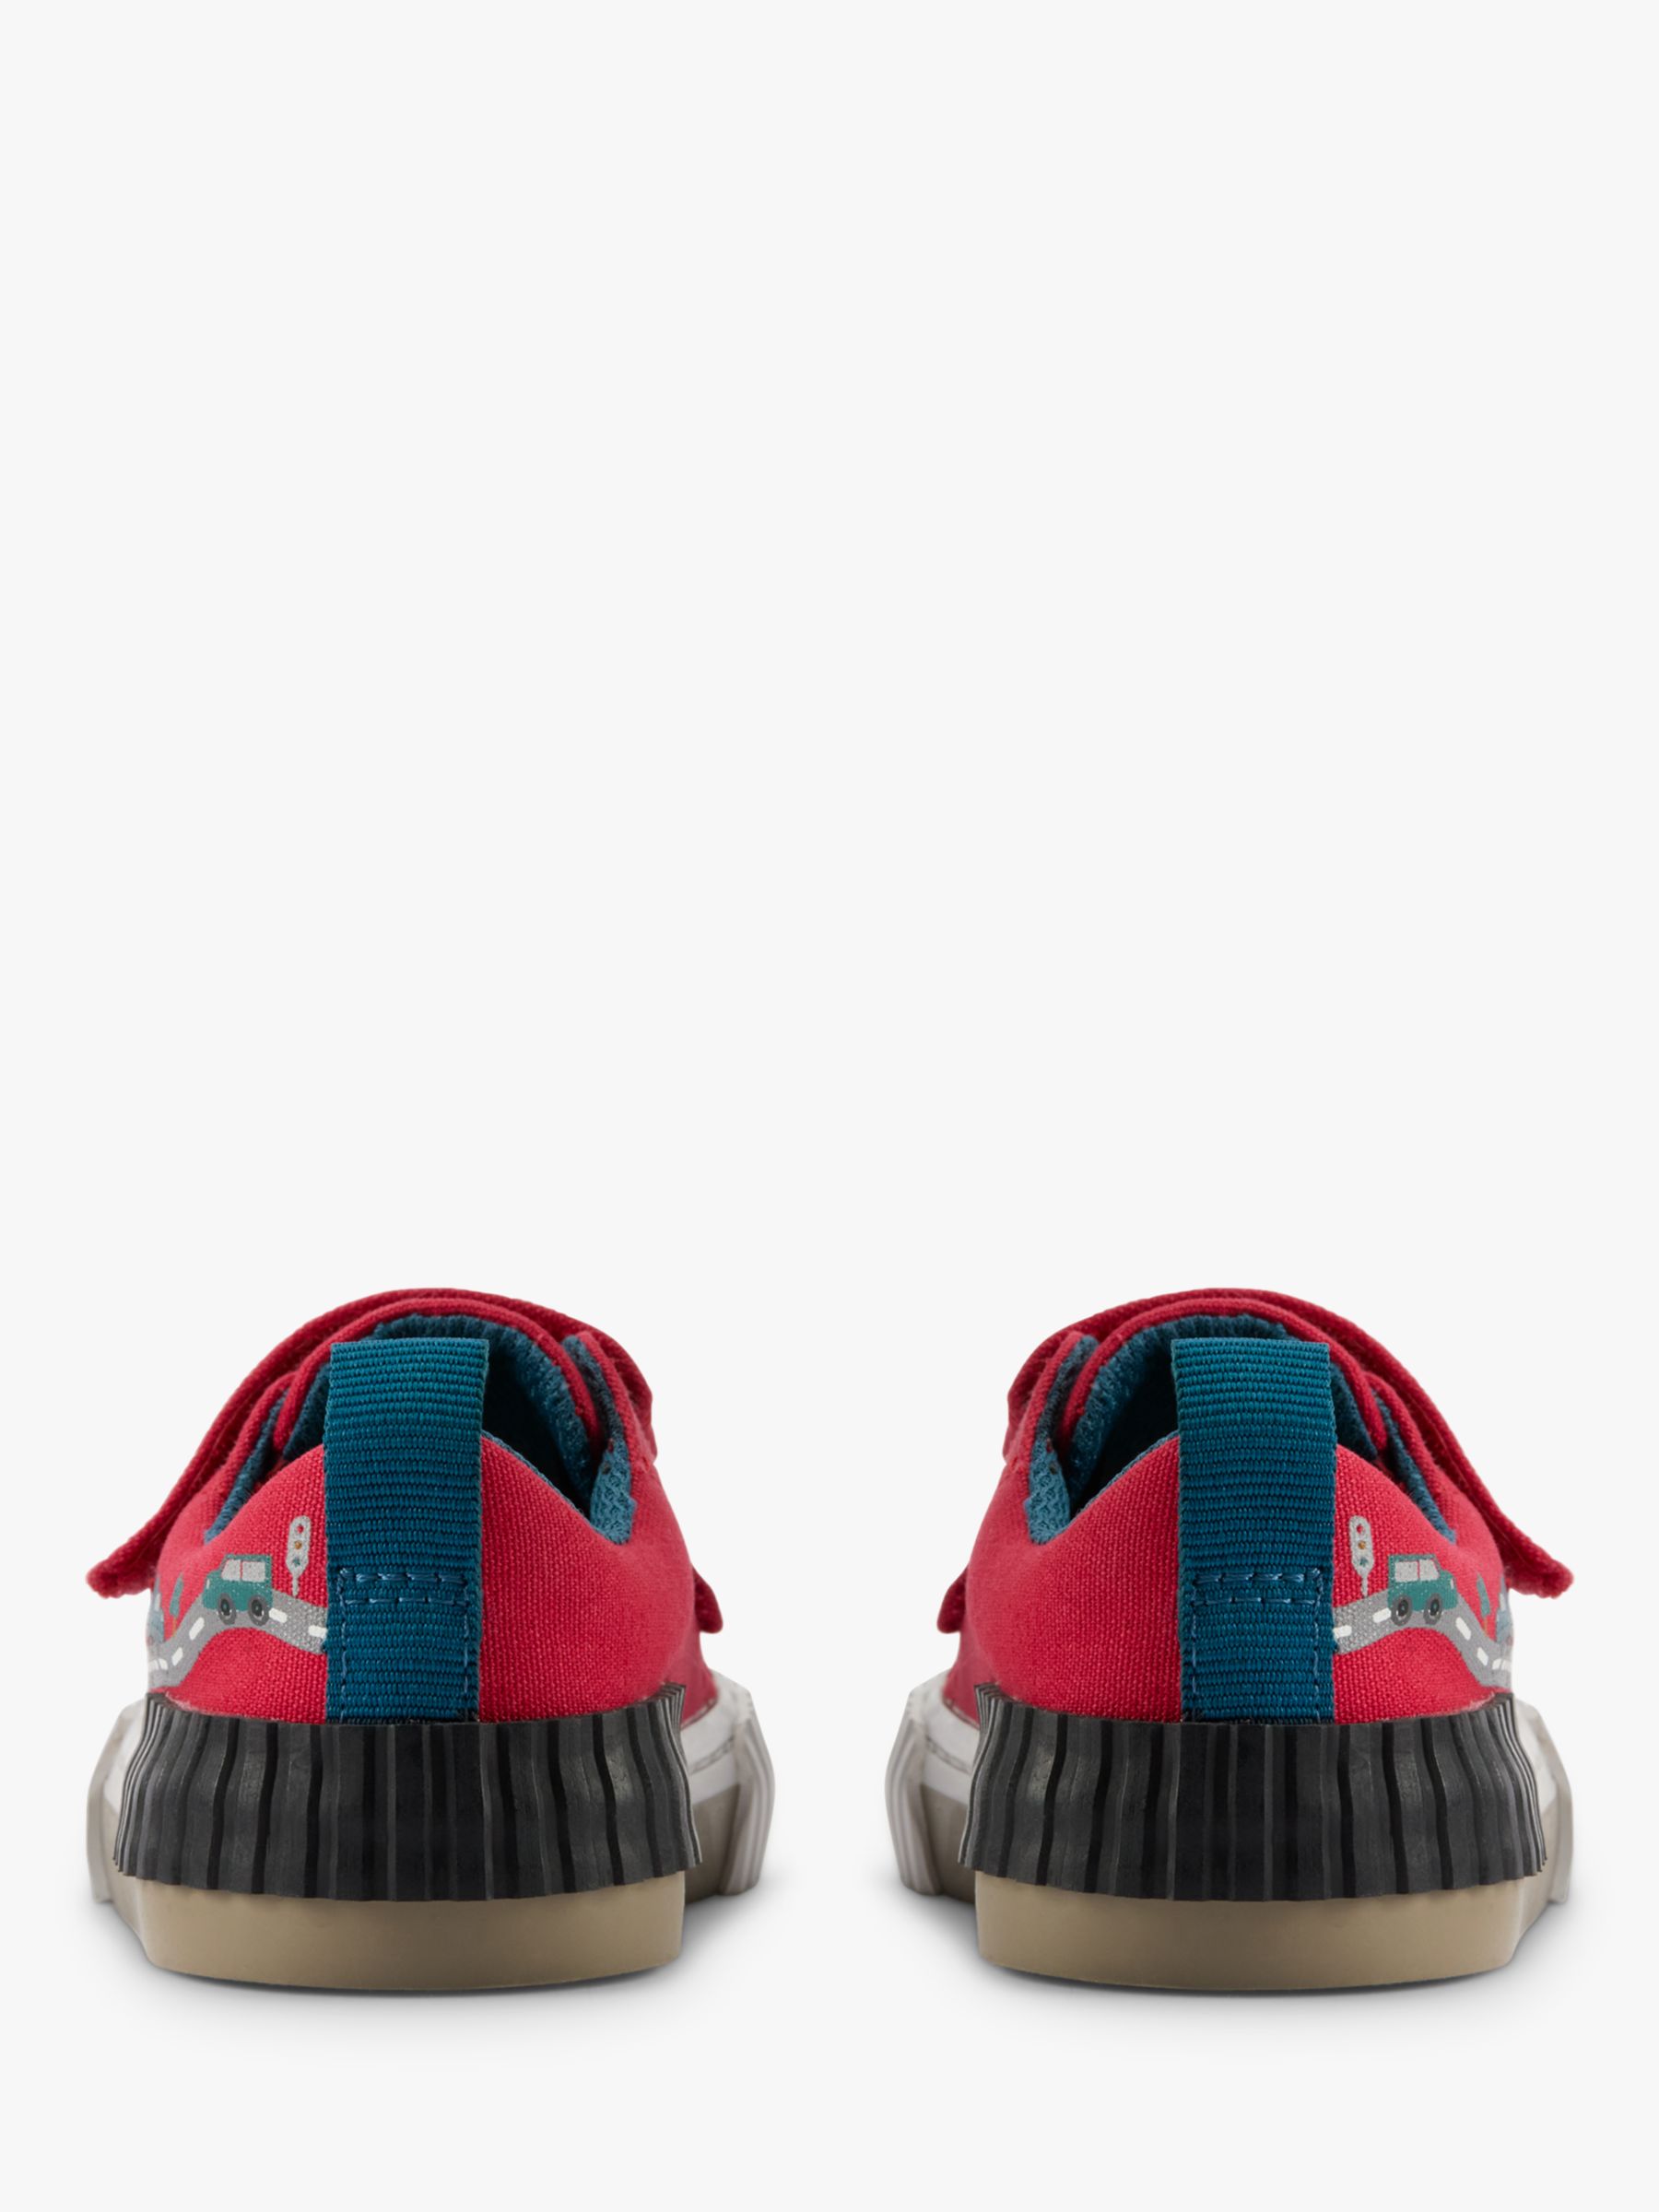 Clarks Kids' Foxing Truck Canvas Shoes, Red/Multi, 6G Jnr